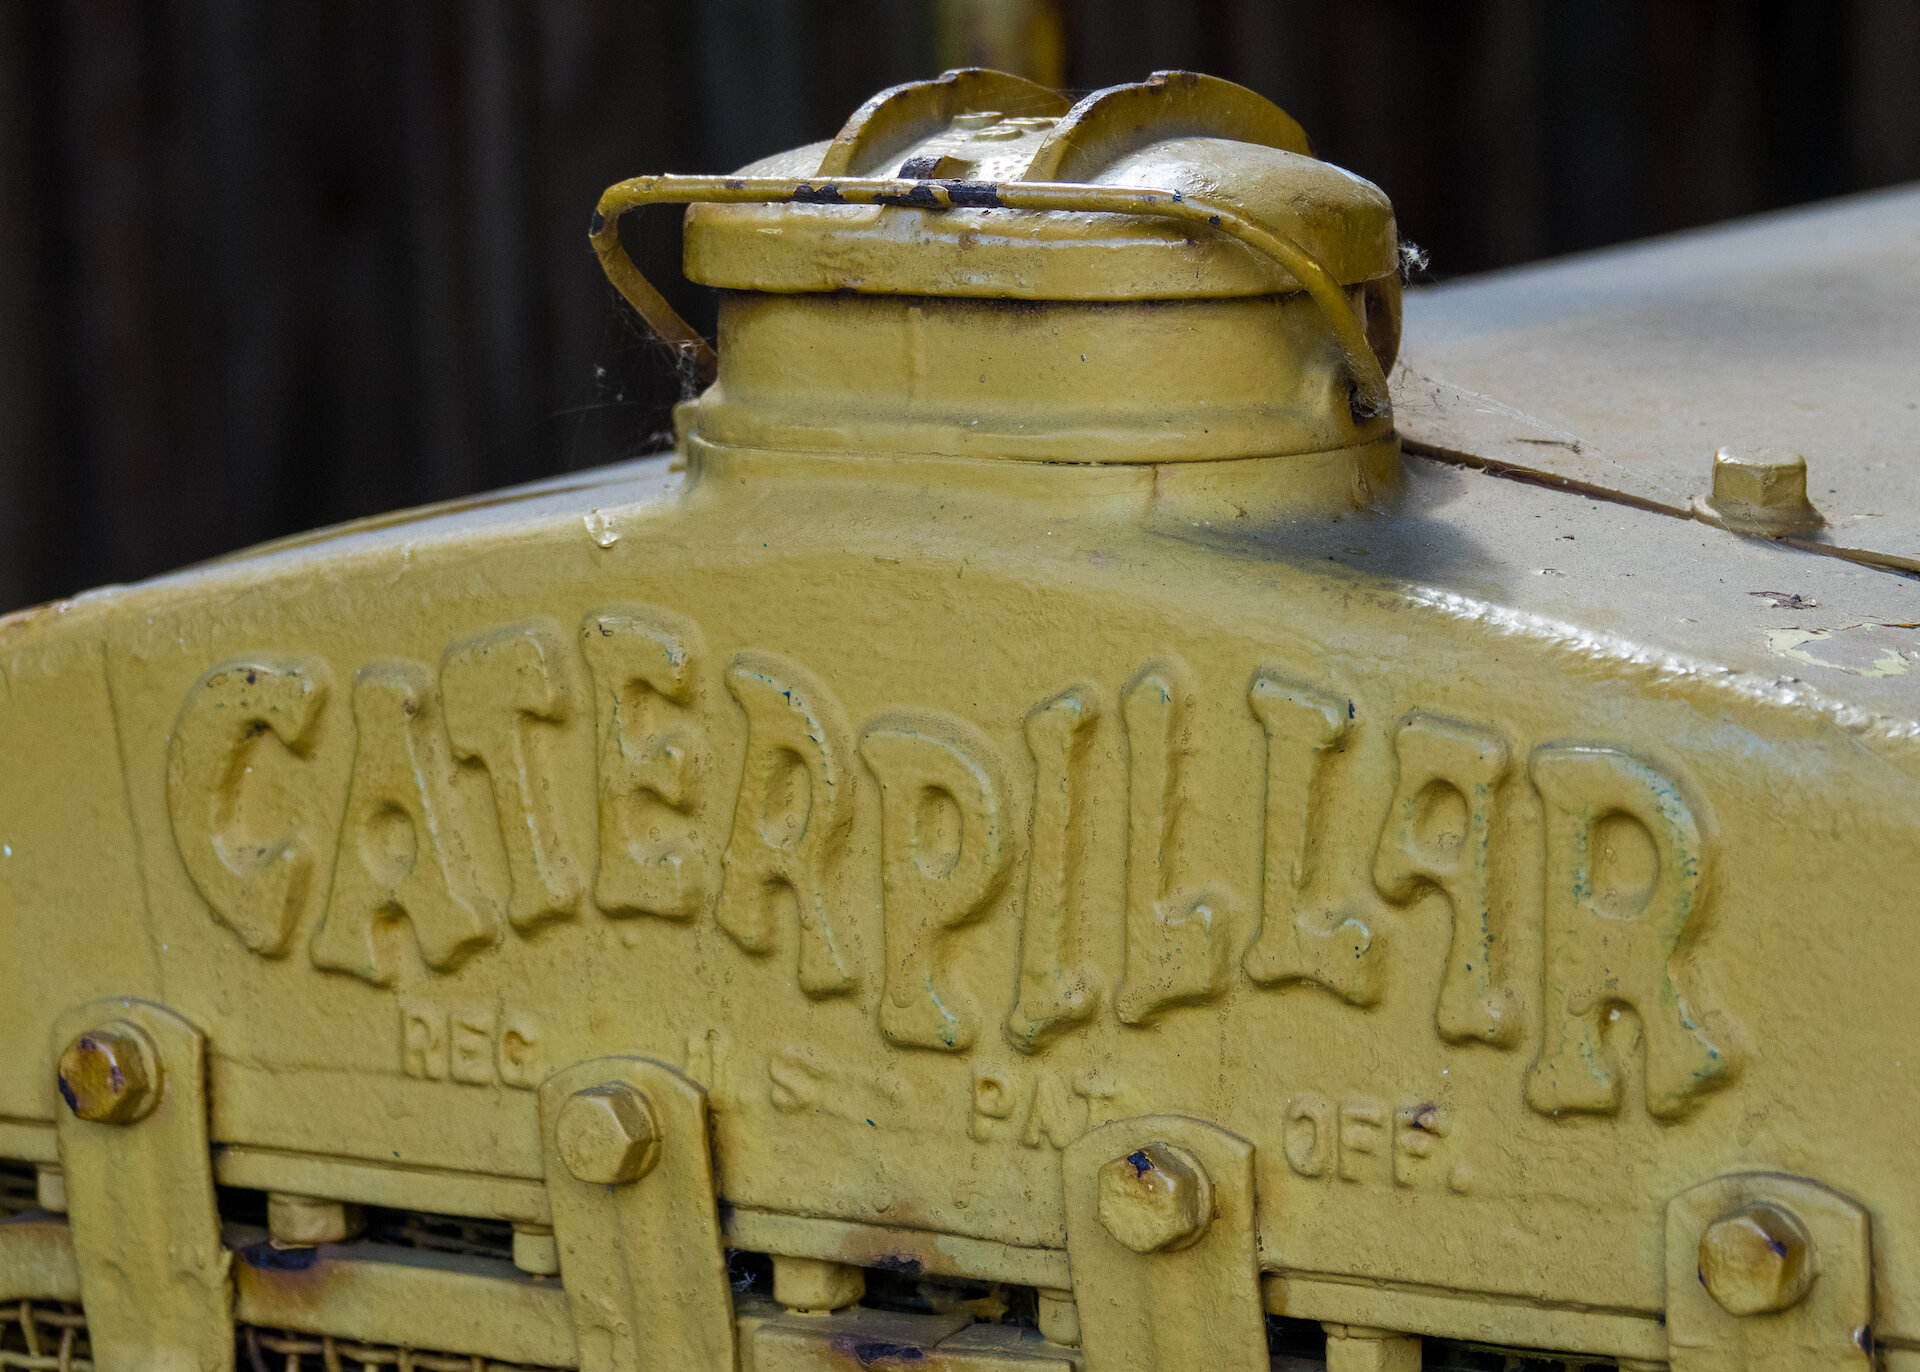  There was lots of old equipment around, including this old caterpillar tractor - love the logo! 